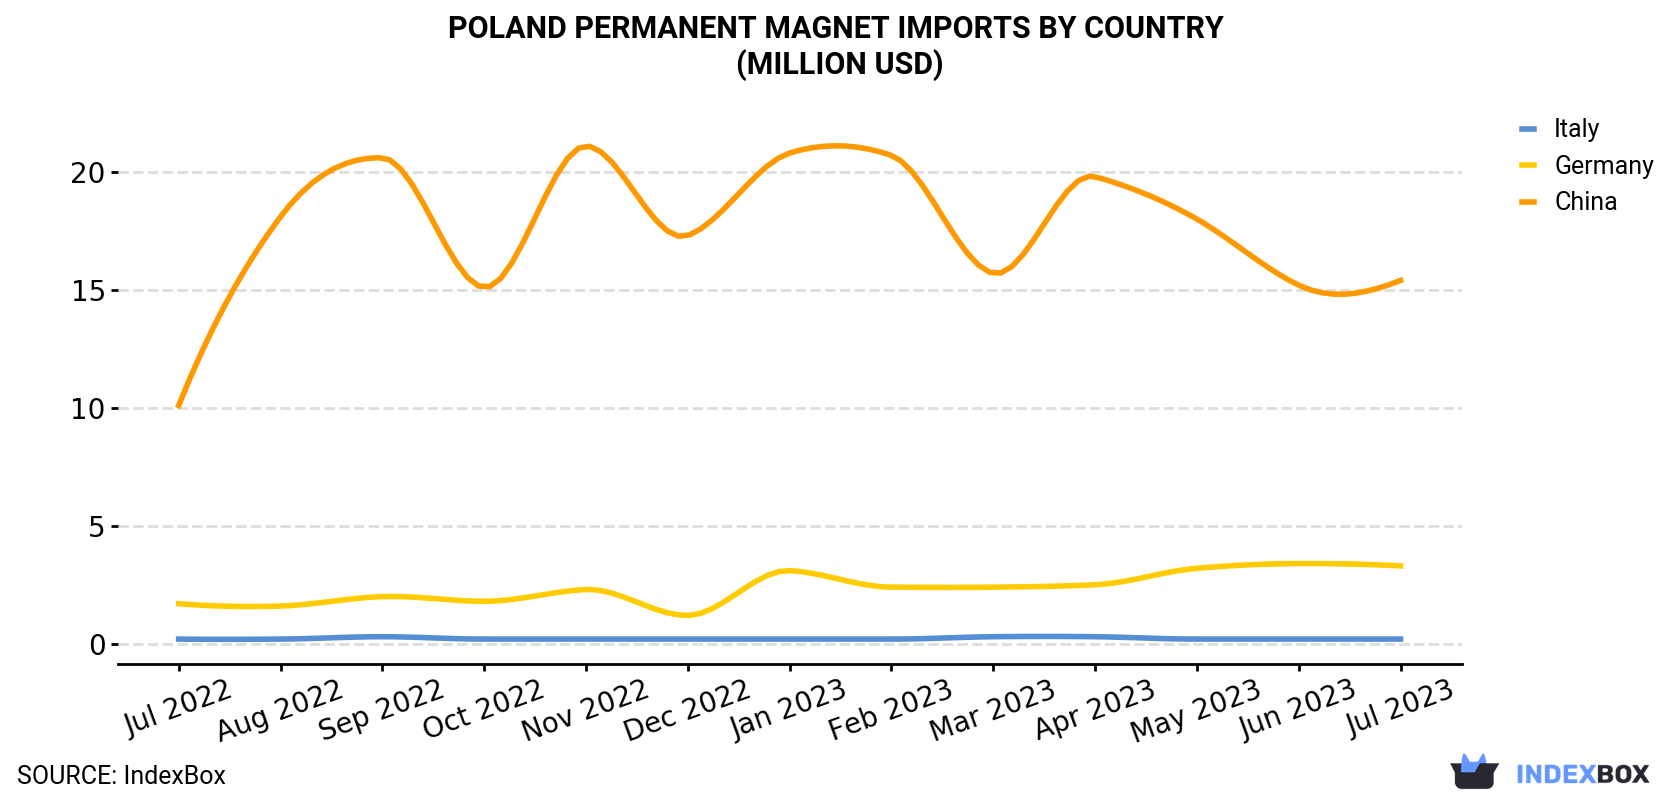 Poland Permanent Magnet Imports By Country (Million USD)